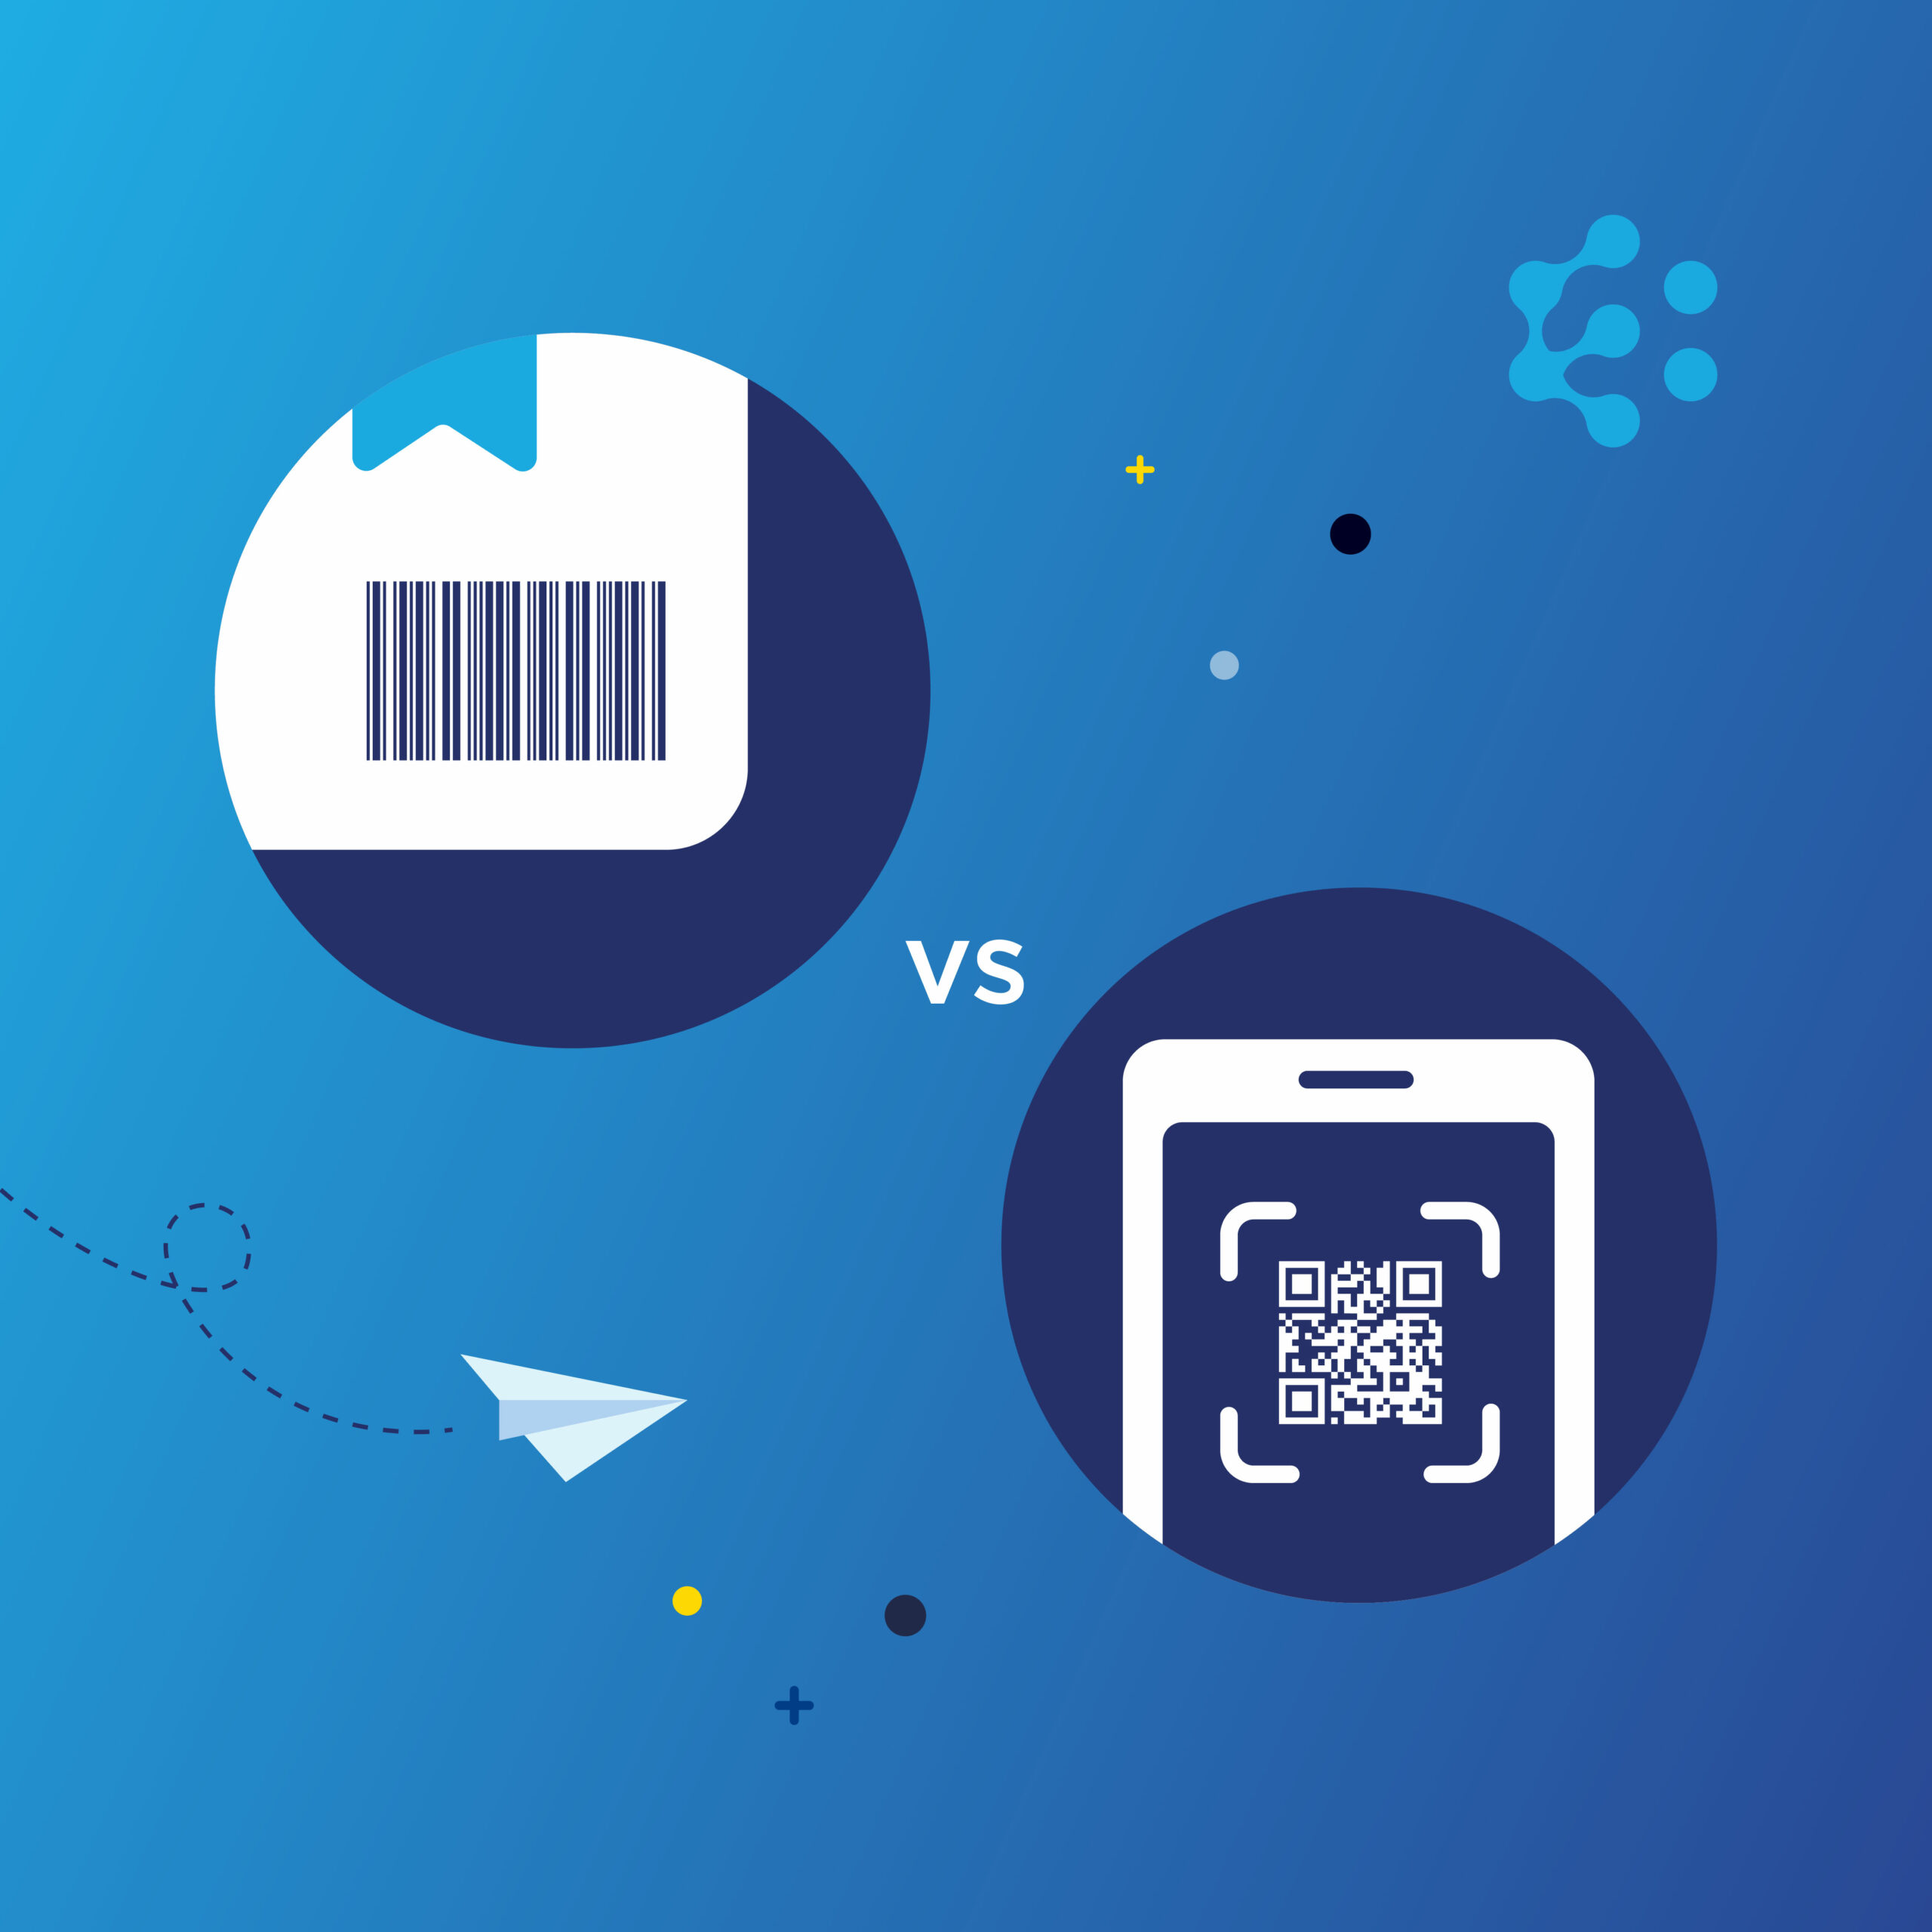 Barcodes vs QR Codes – What’s Better for Inventory Management?